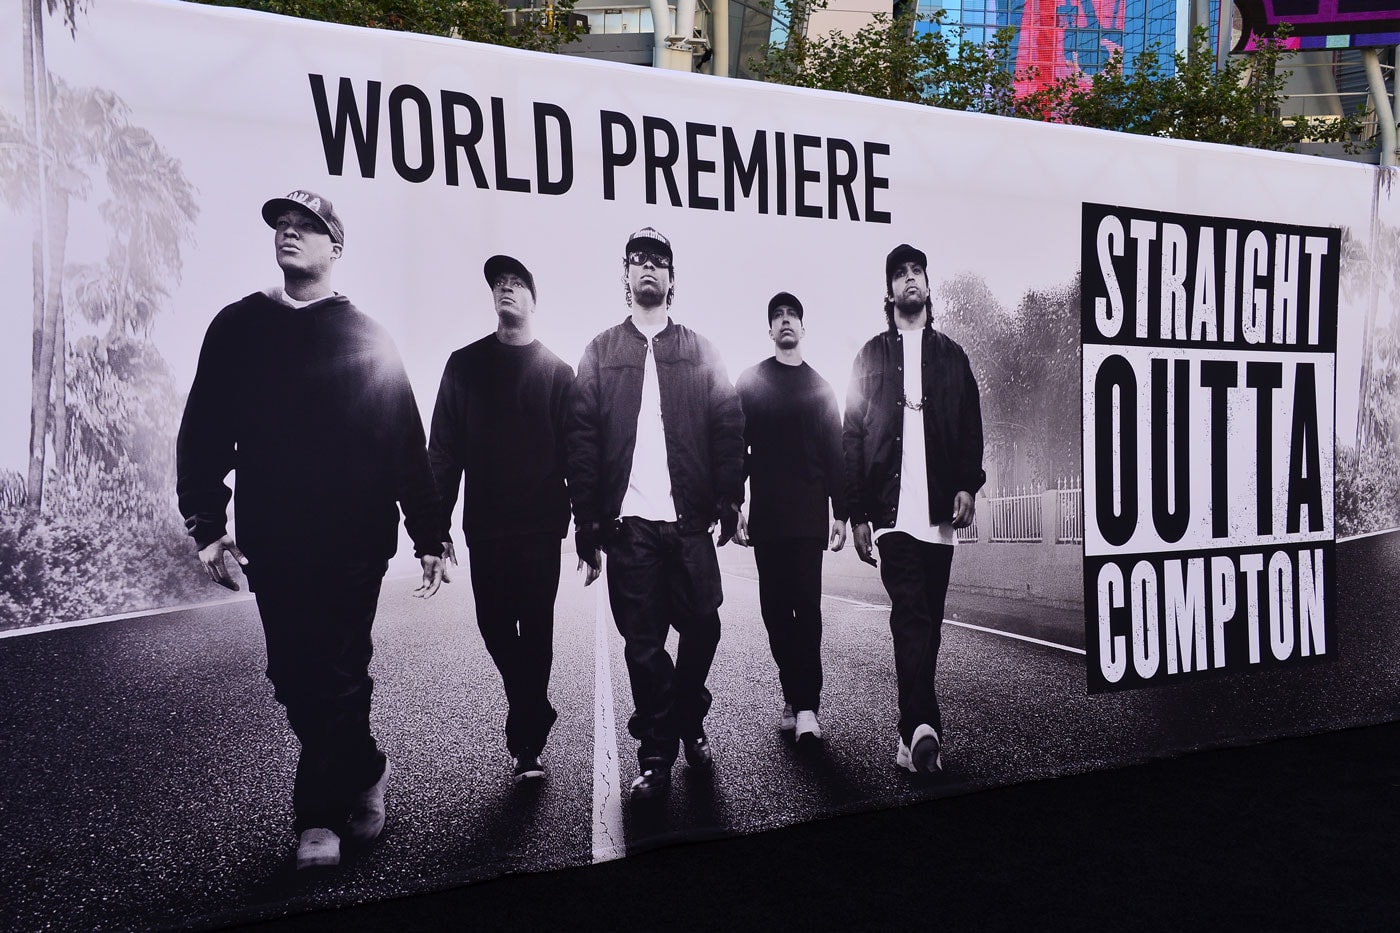 'Straight Outta Compton' Sees Unexpected Huge Success With Opening Weekend Sales